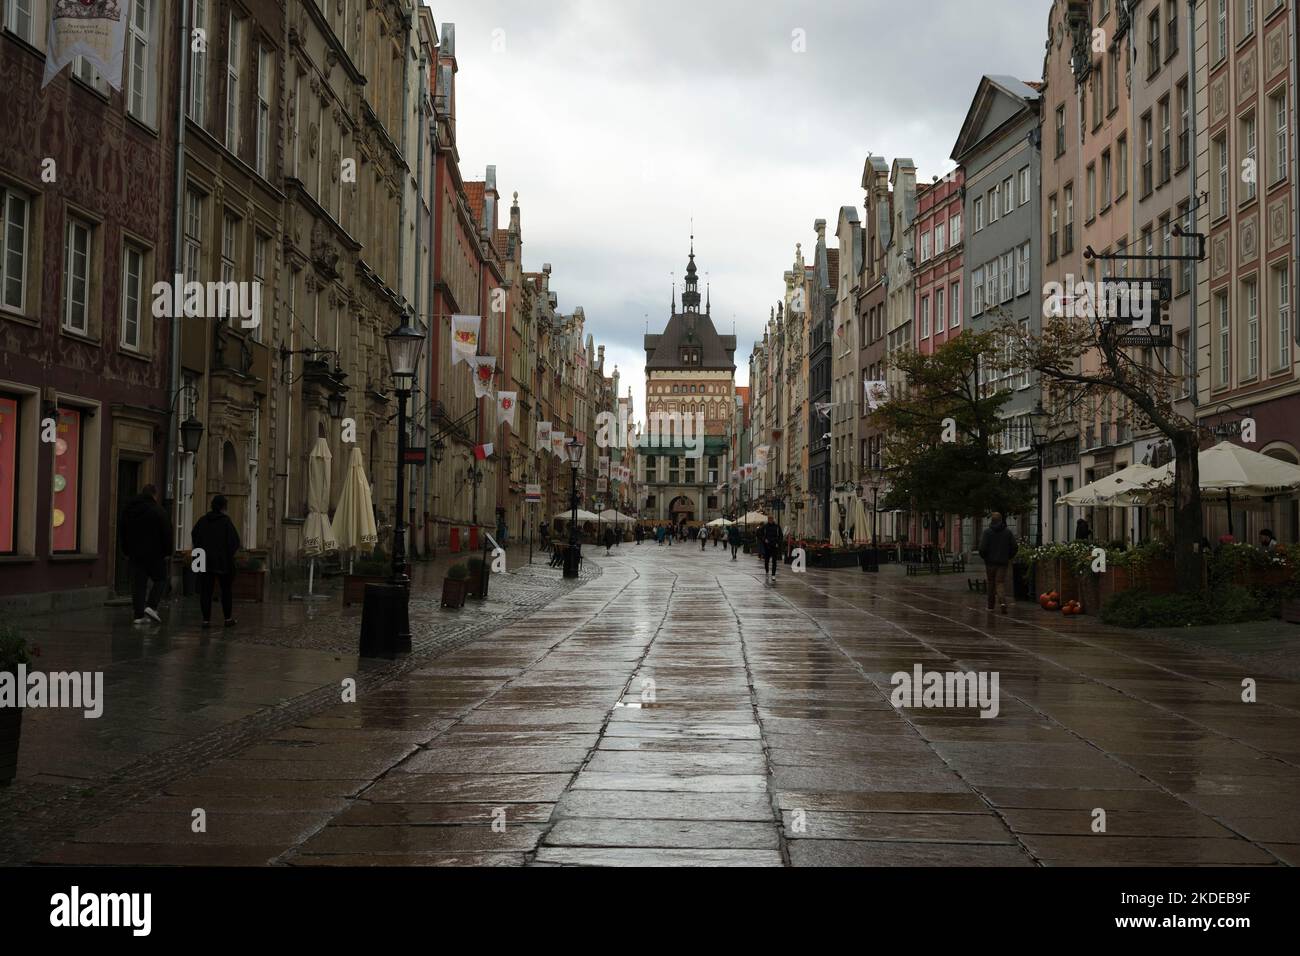 Historic buildings and city gates after rain Stock Photo